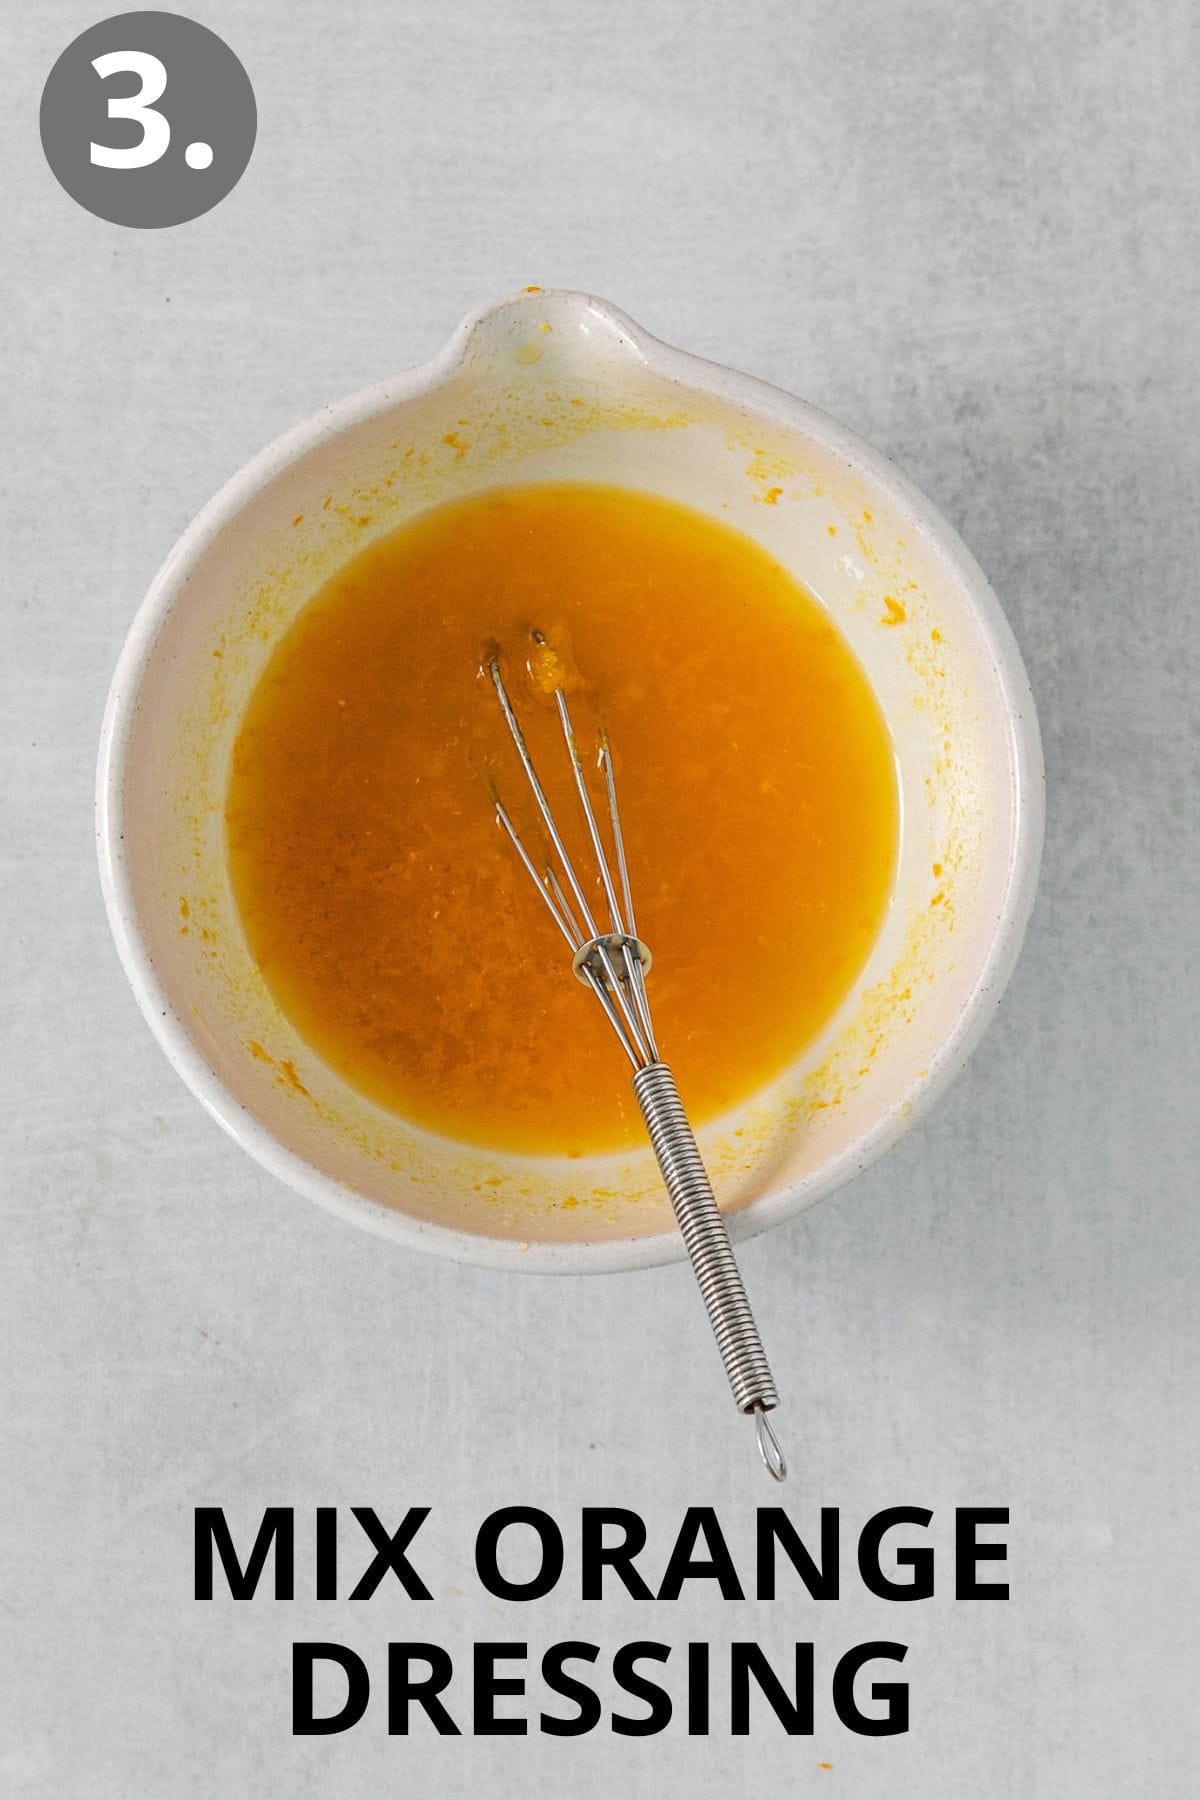 Orange dressing and a whisk in a mixing bowl